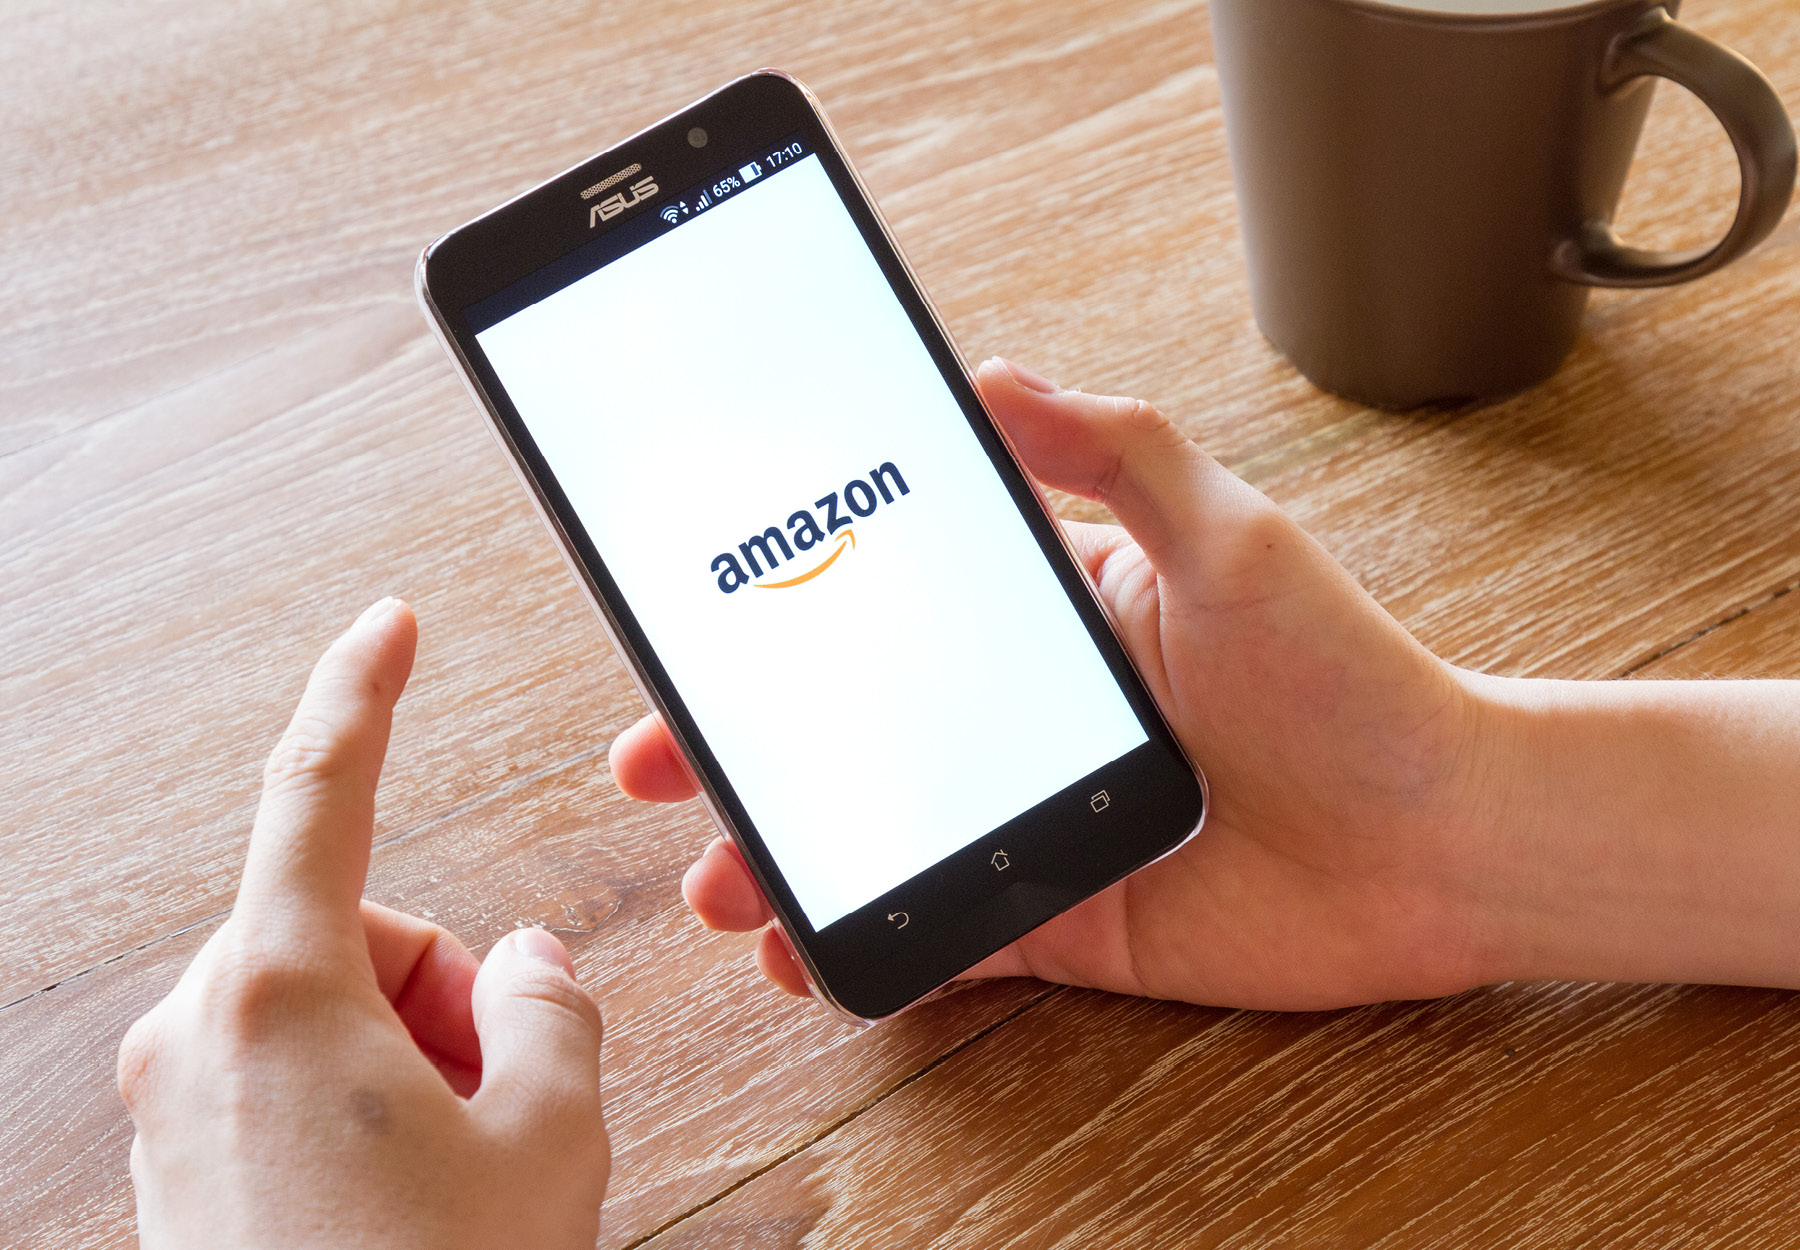 Closeup image of hands using a phone with the Amazon.com logo on the screen. Stock photo.